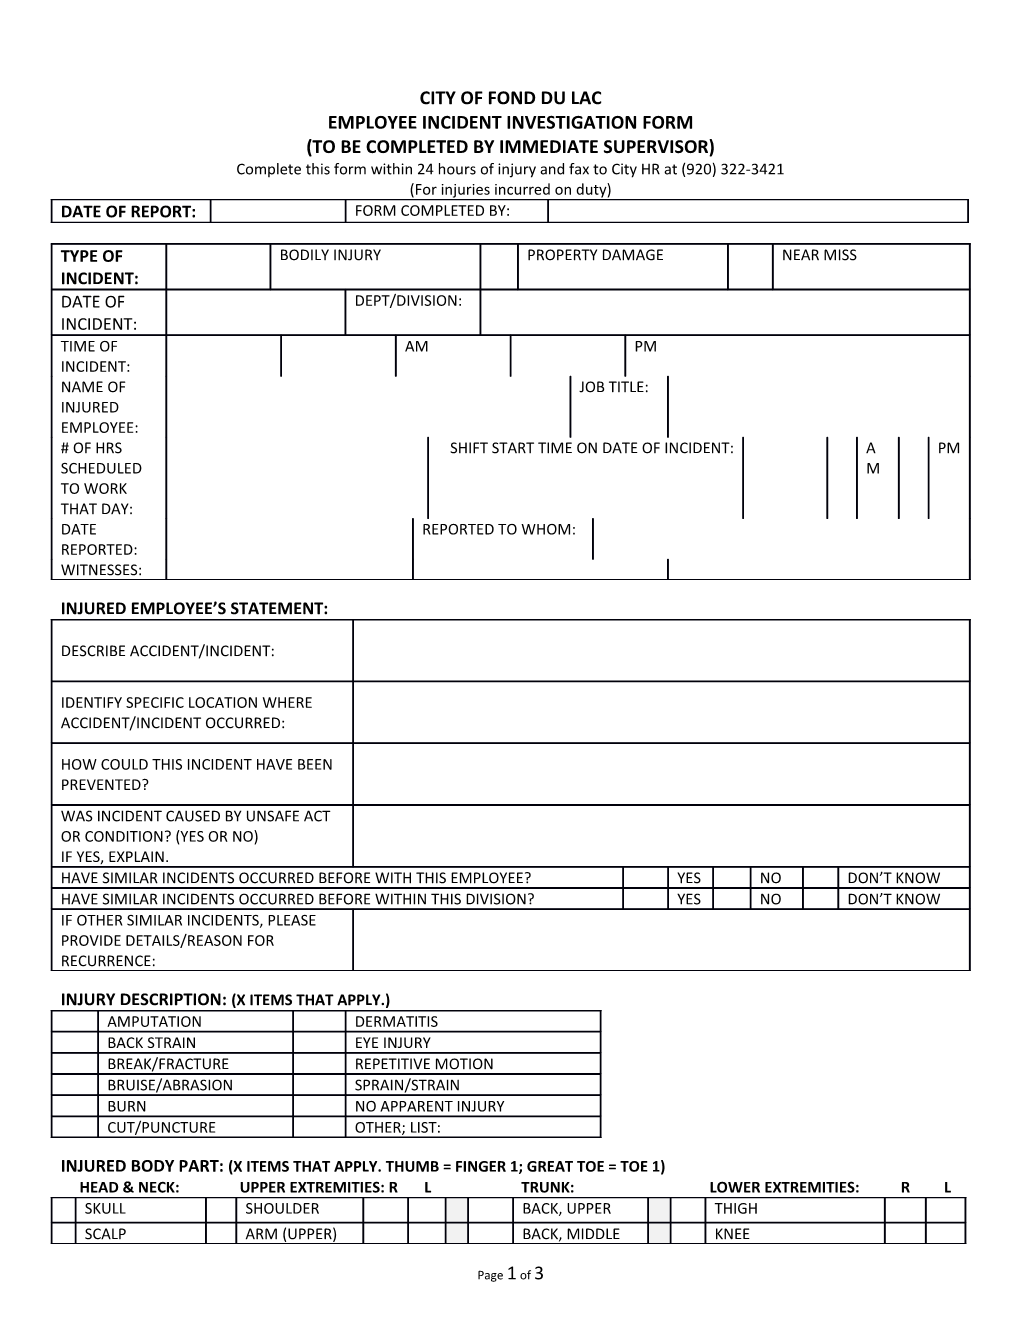 Employee Incident Investigation Form